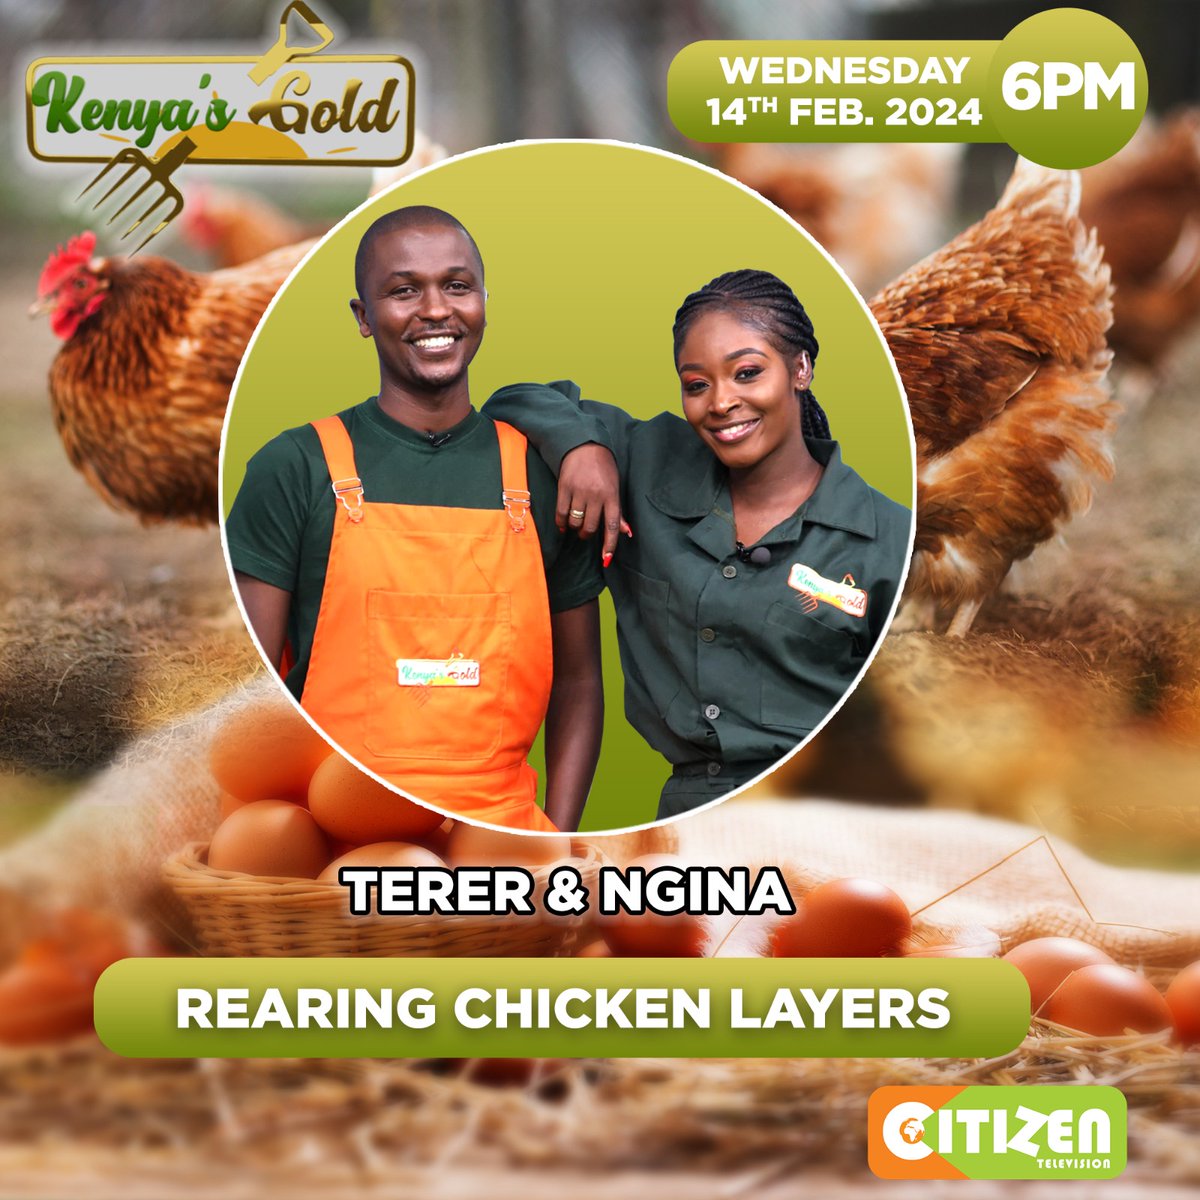 Join us as we discuss chicken layers rearing!